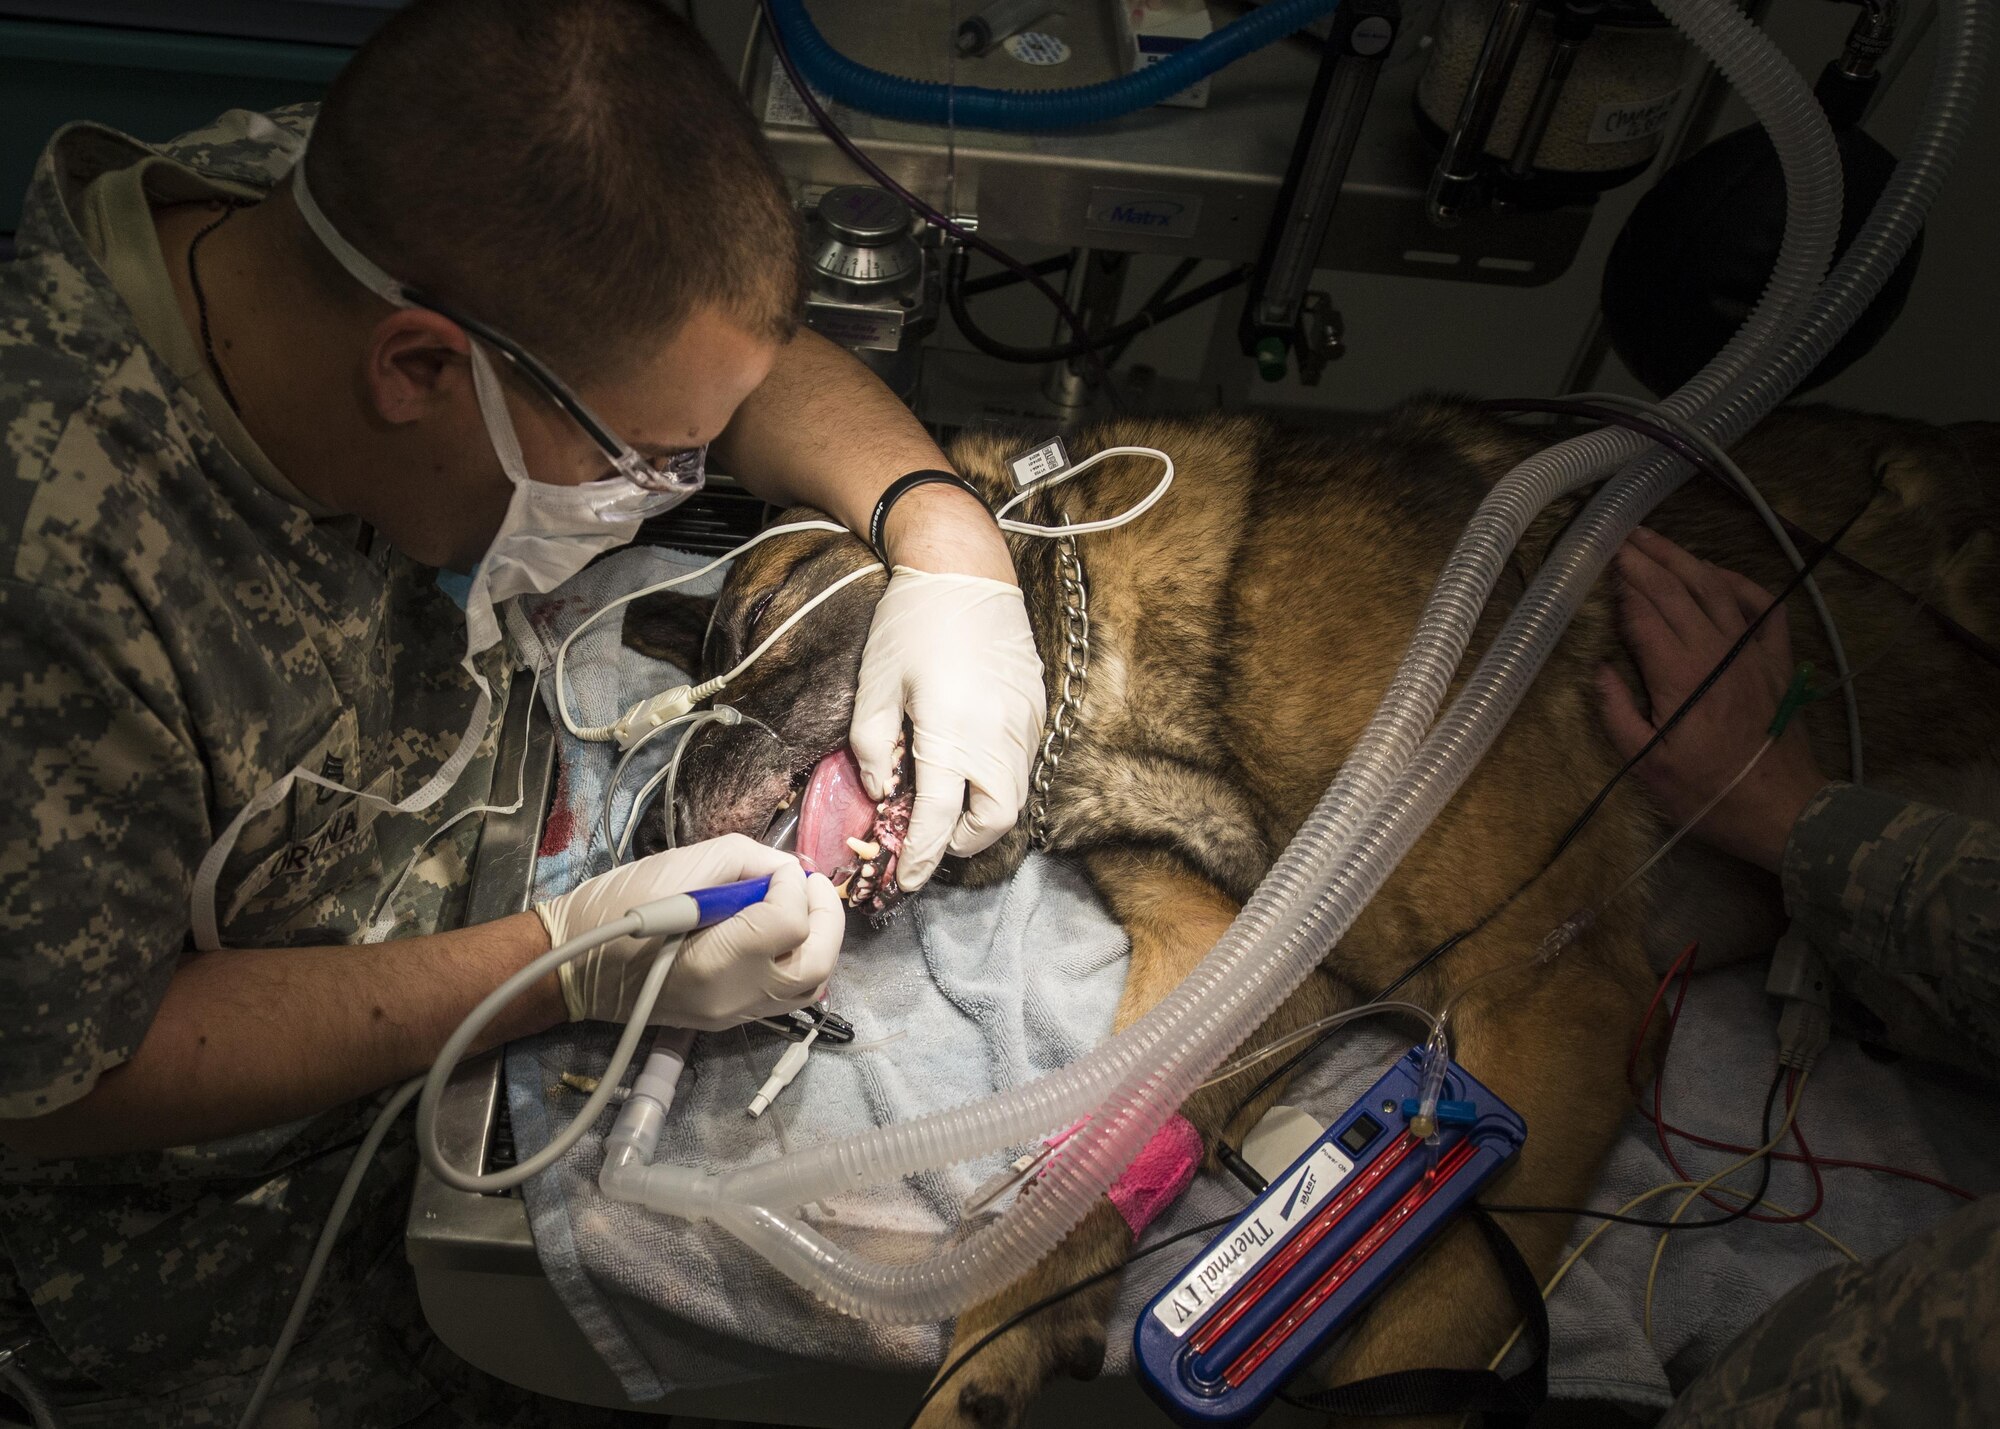 Dylan, a military working dog with the 49th Security Forces Squadron, gets a routine dental cleaning at the veterinary clinic at Holloman Air Force Base, N.M. Dec. 13, 2016. Holloman’s MWDs receive routine dental and medical checkups. A veterinarian is on station 24/7 to assure the health of the dogs. (U.S. Air Force photo by Airman 1st Class Alexis P. Docherty)